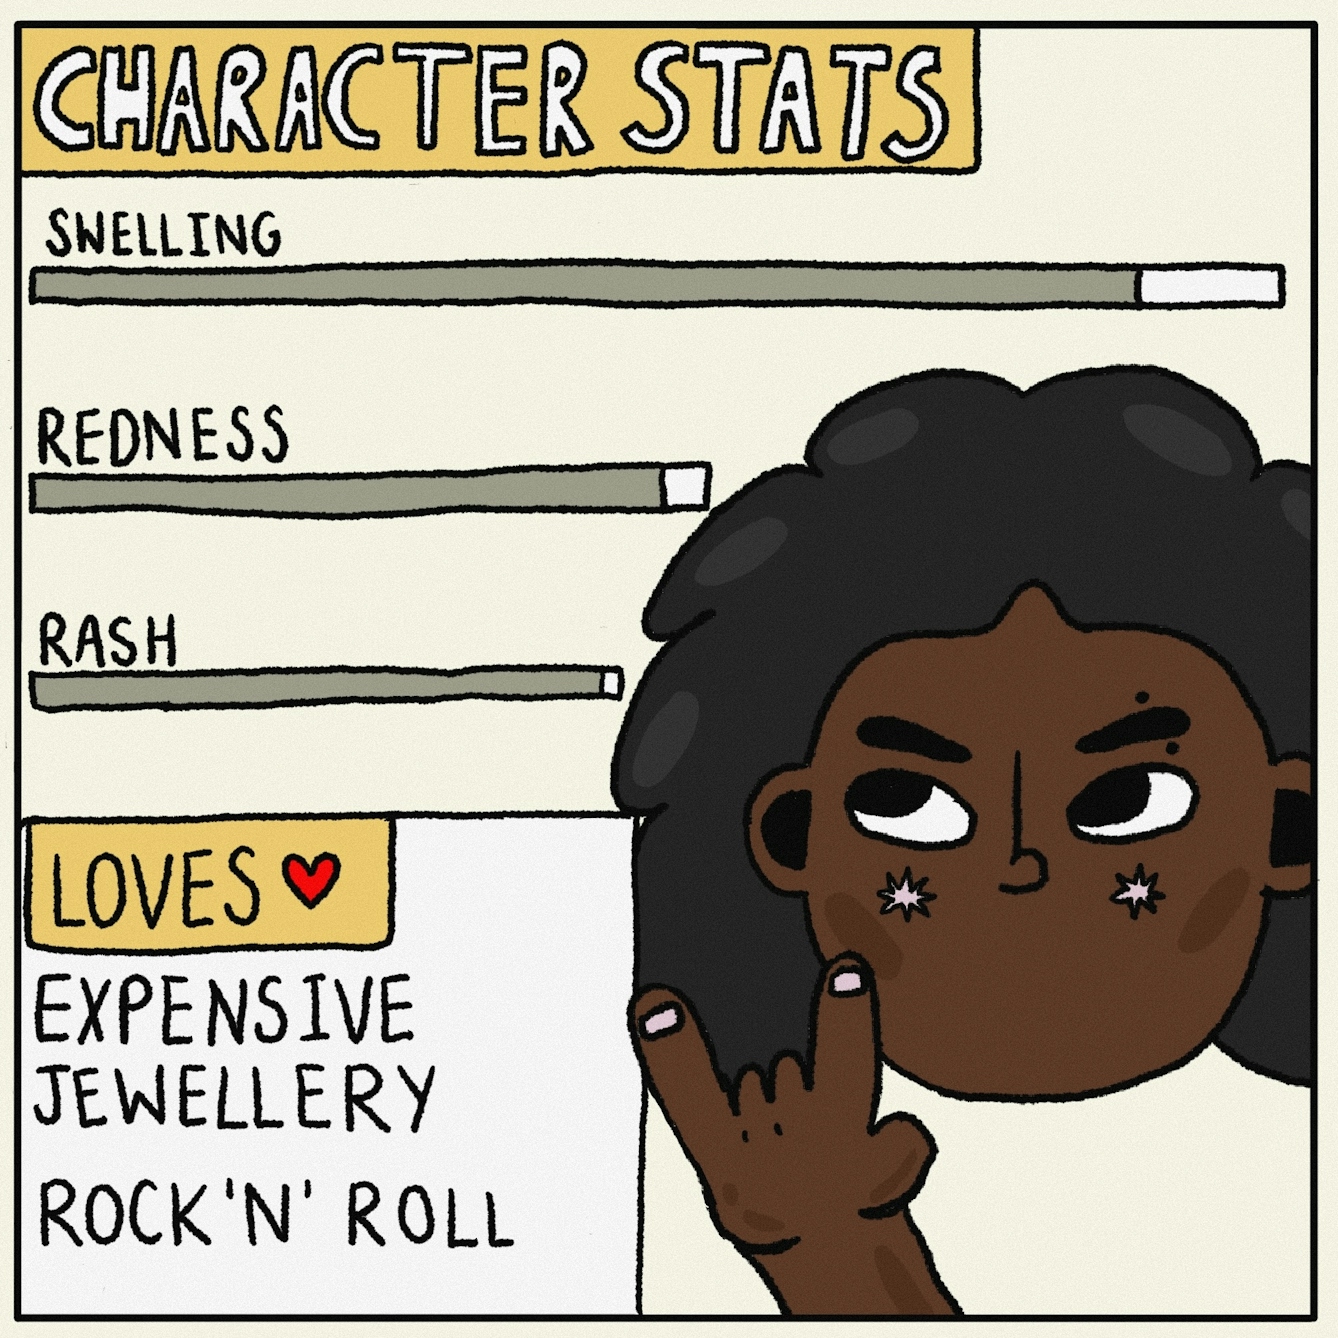 Panel 2 of a digitally drawn, four-panel comic titled ‘Winning’. The text at the top says ‘CHARACTER STATS’. The sliders show your character suffers badly with swelling, redness and rashes, but as a metalhead, loves expensive jewellery and rock ‘n’ roll.